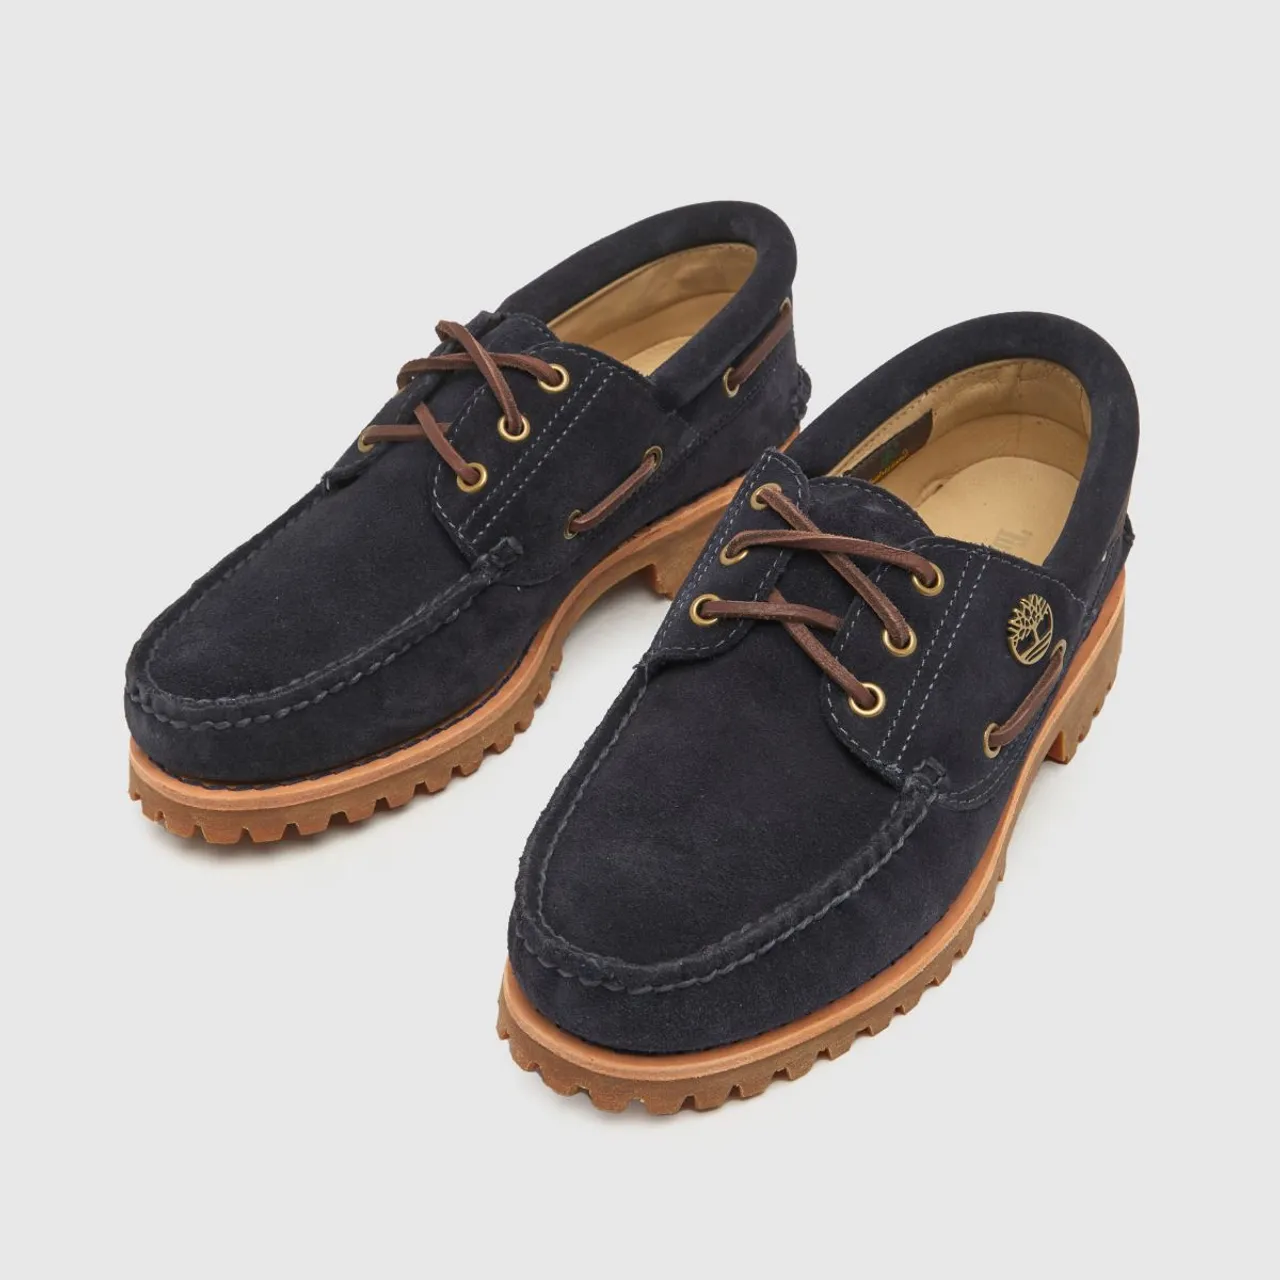 Timberland Authentic Handsewn Boat Shoes in Navy